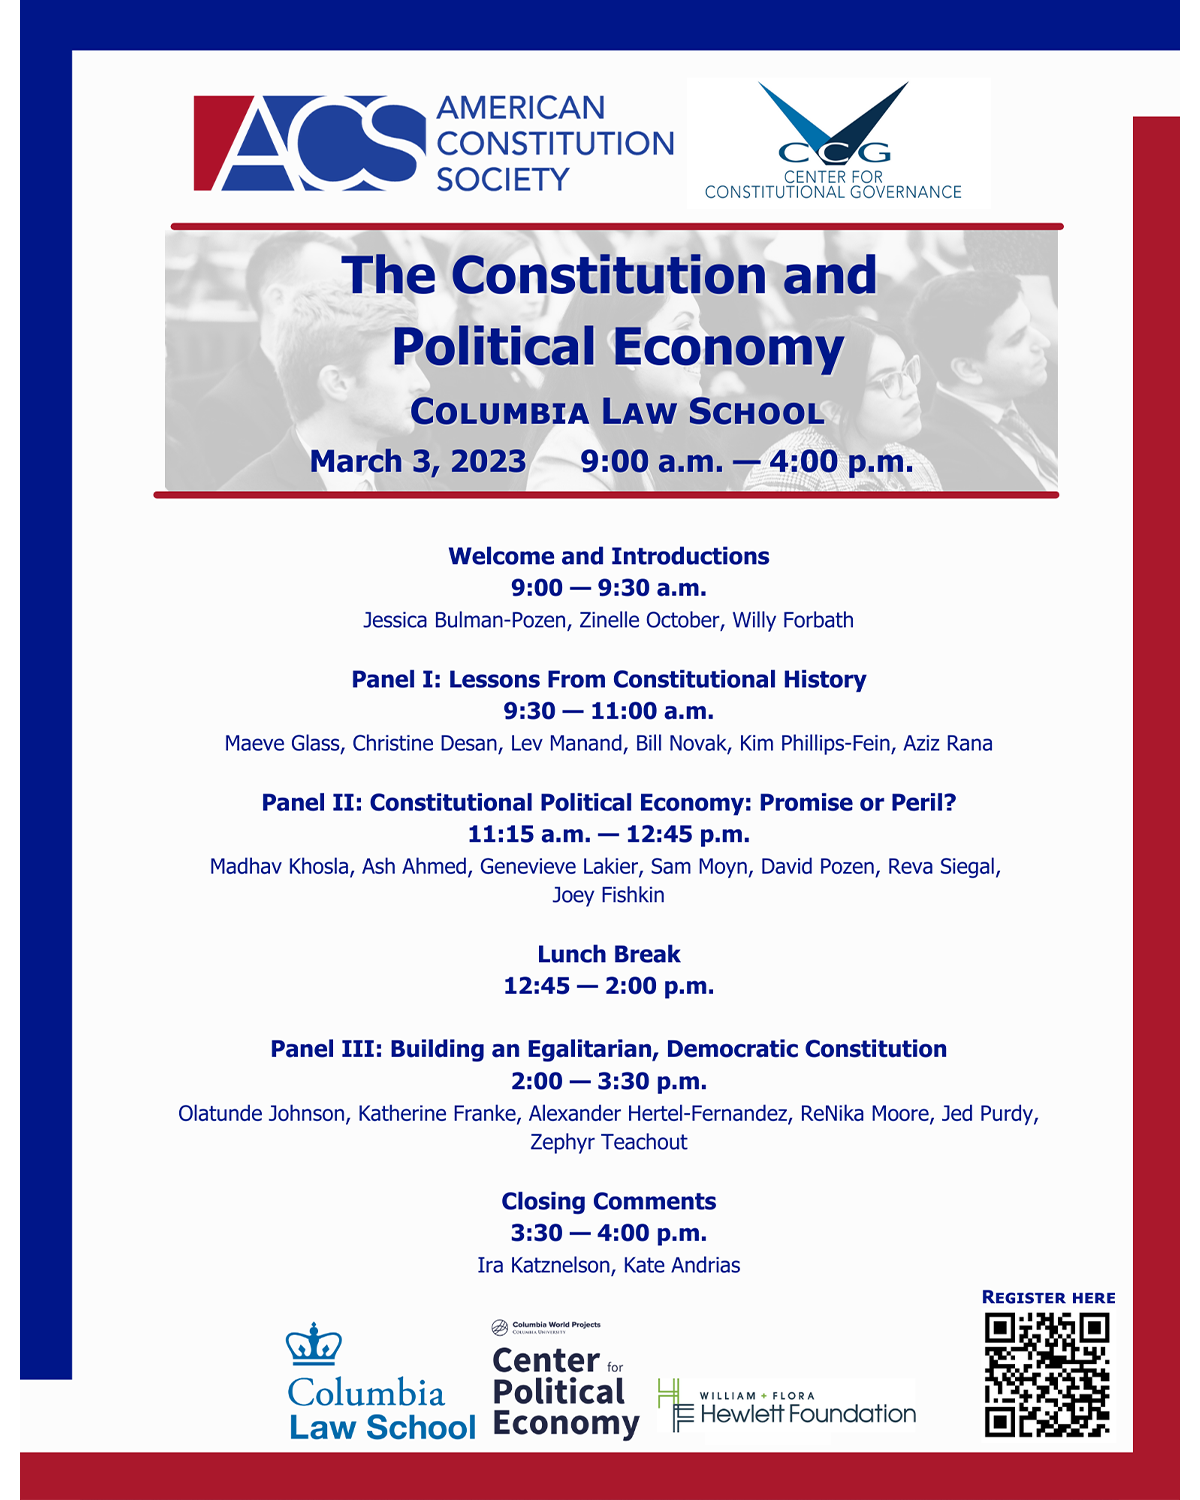 The Constitution and Political Economy